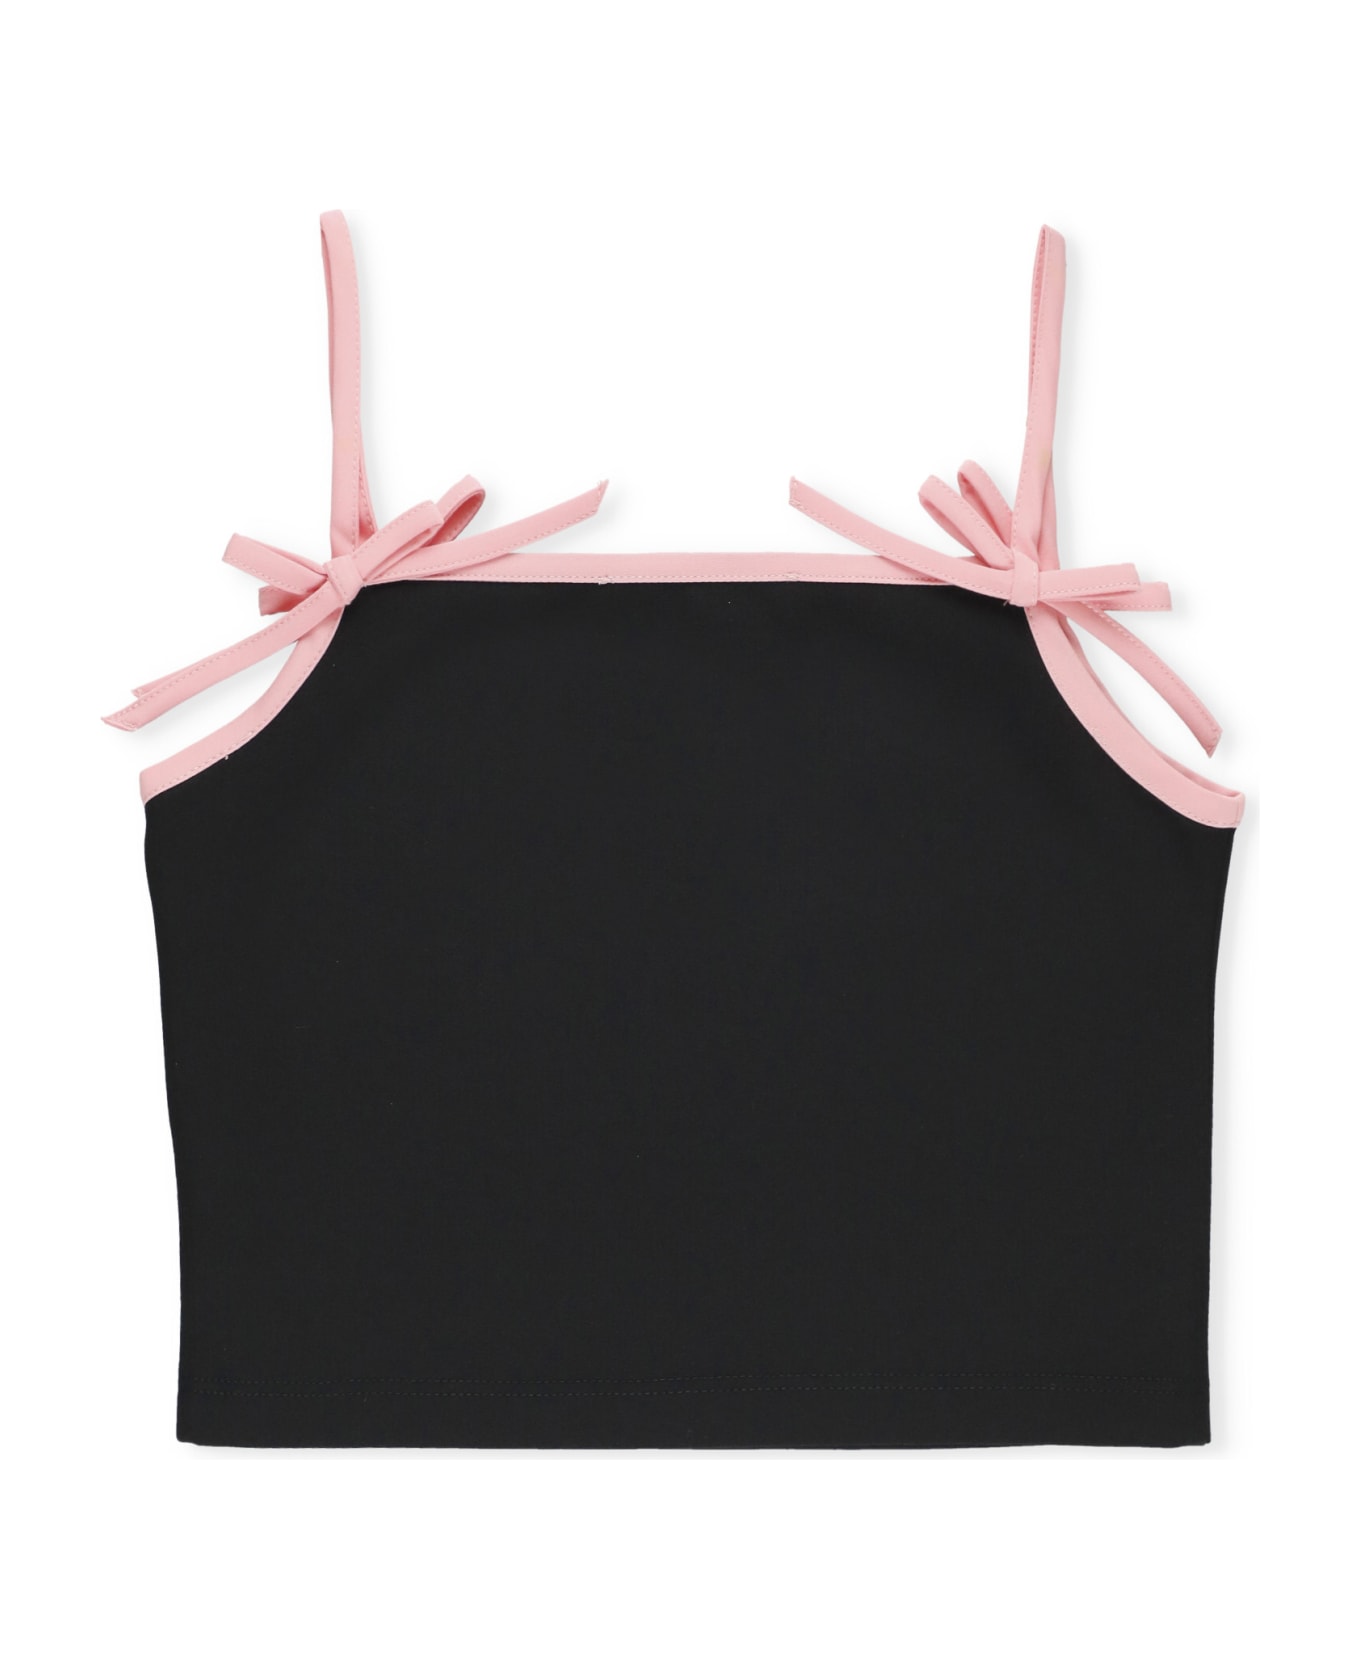 MSGM Cropped Top With Logo - Black